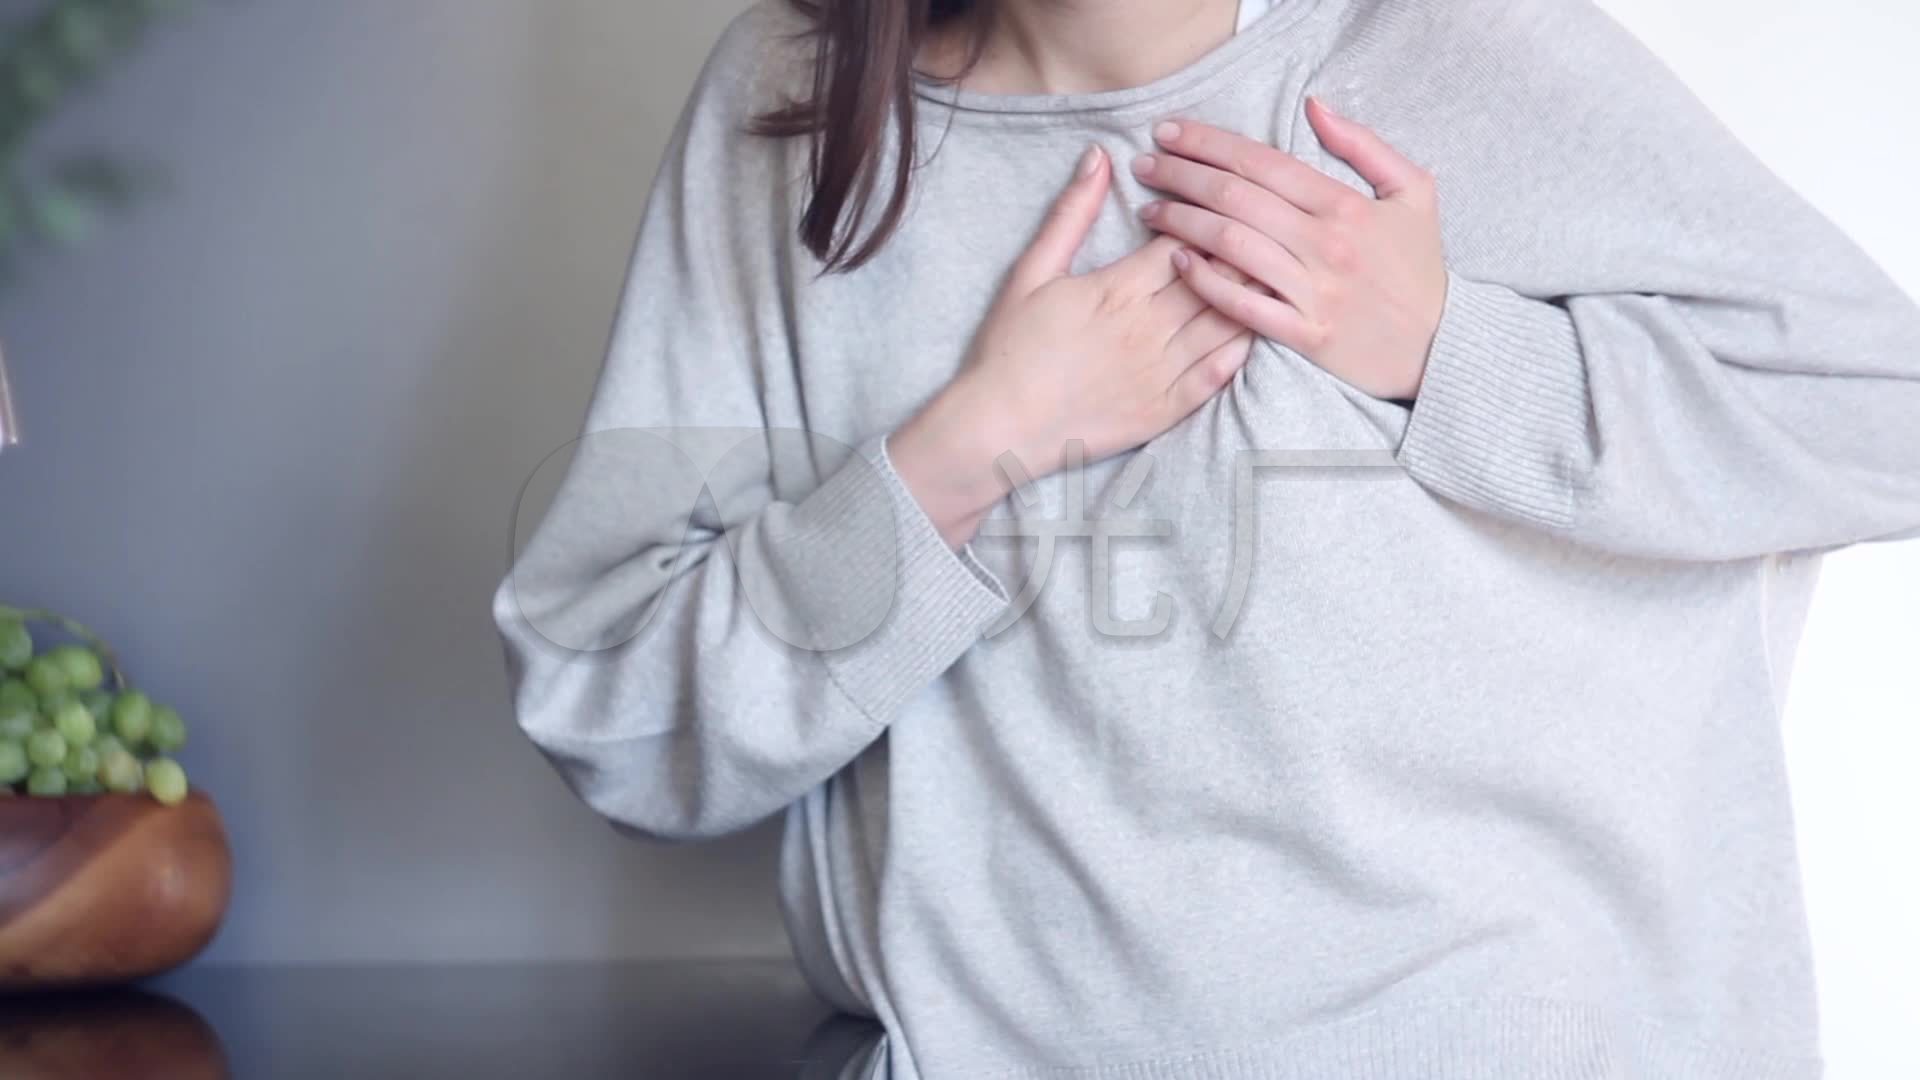 Female Body Is Uncomfortable, Covering Her Chest, Heartache Picture And HD Photos | Free ...